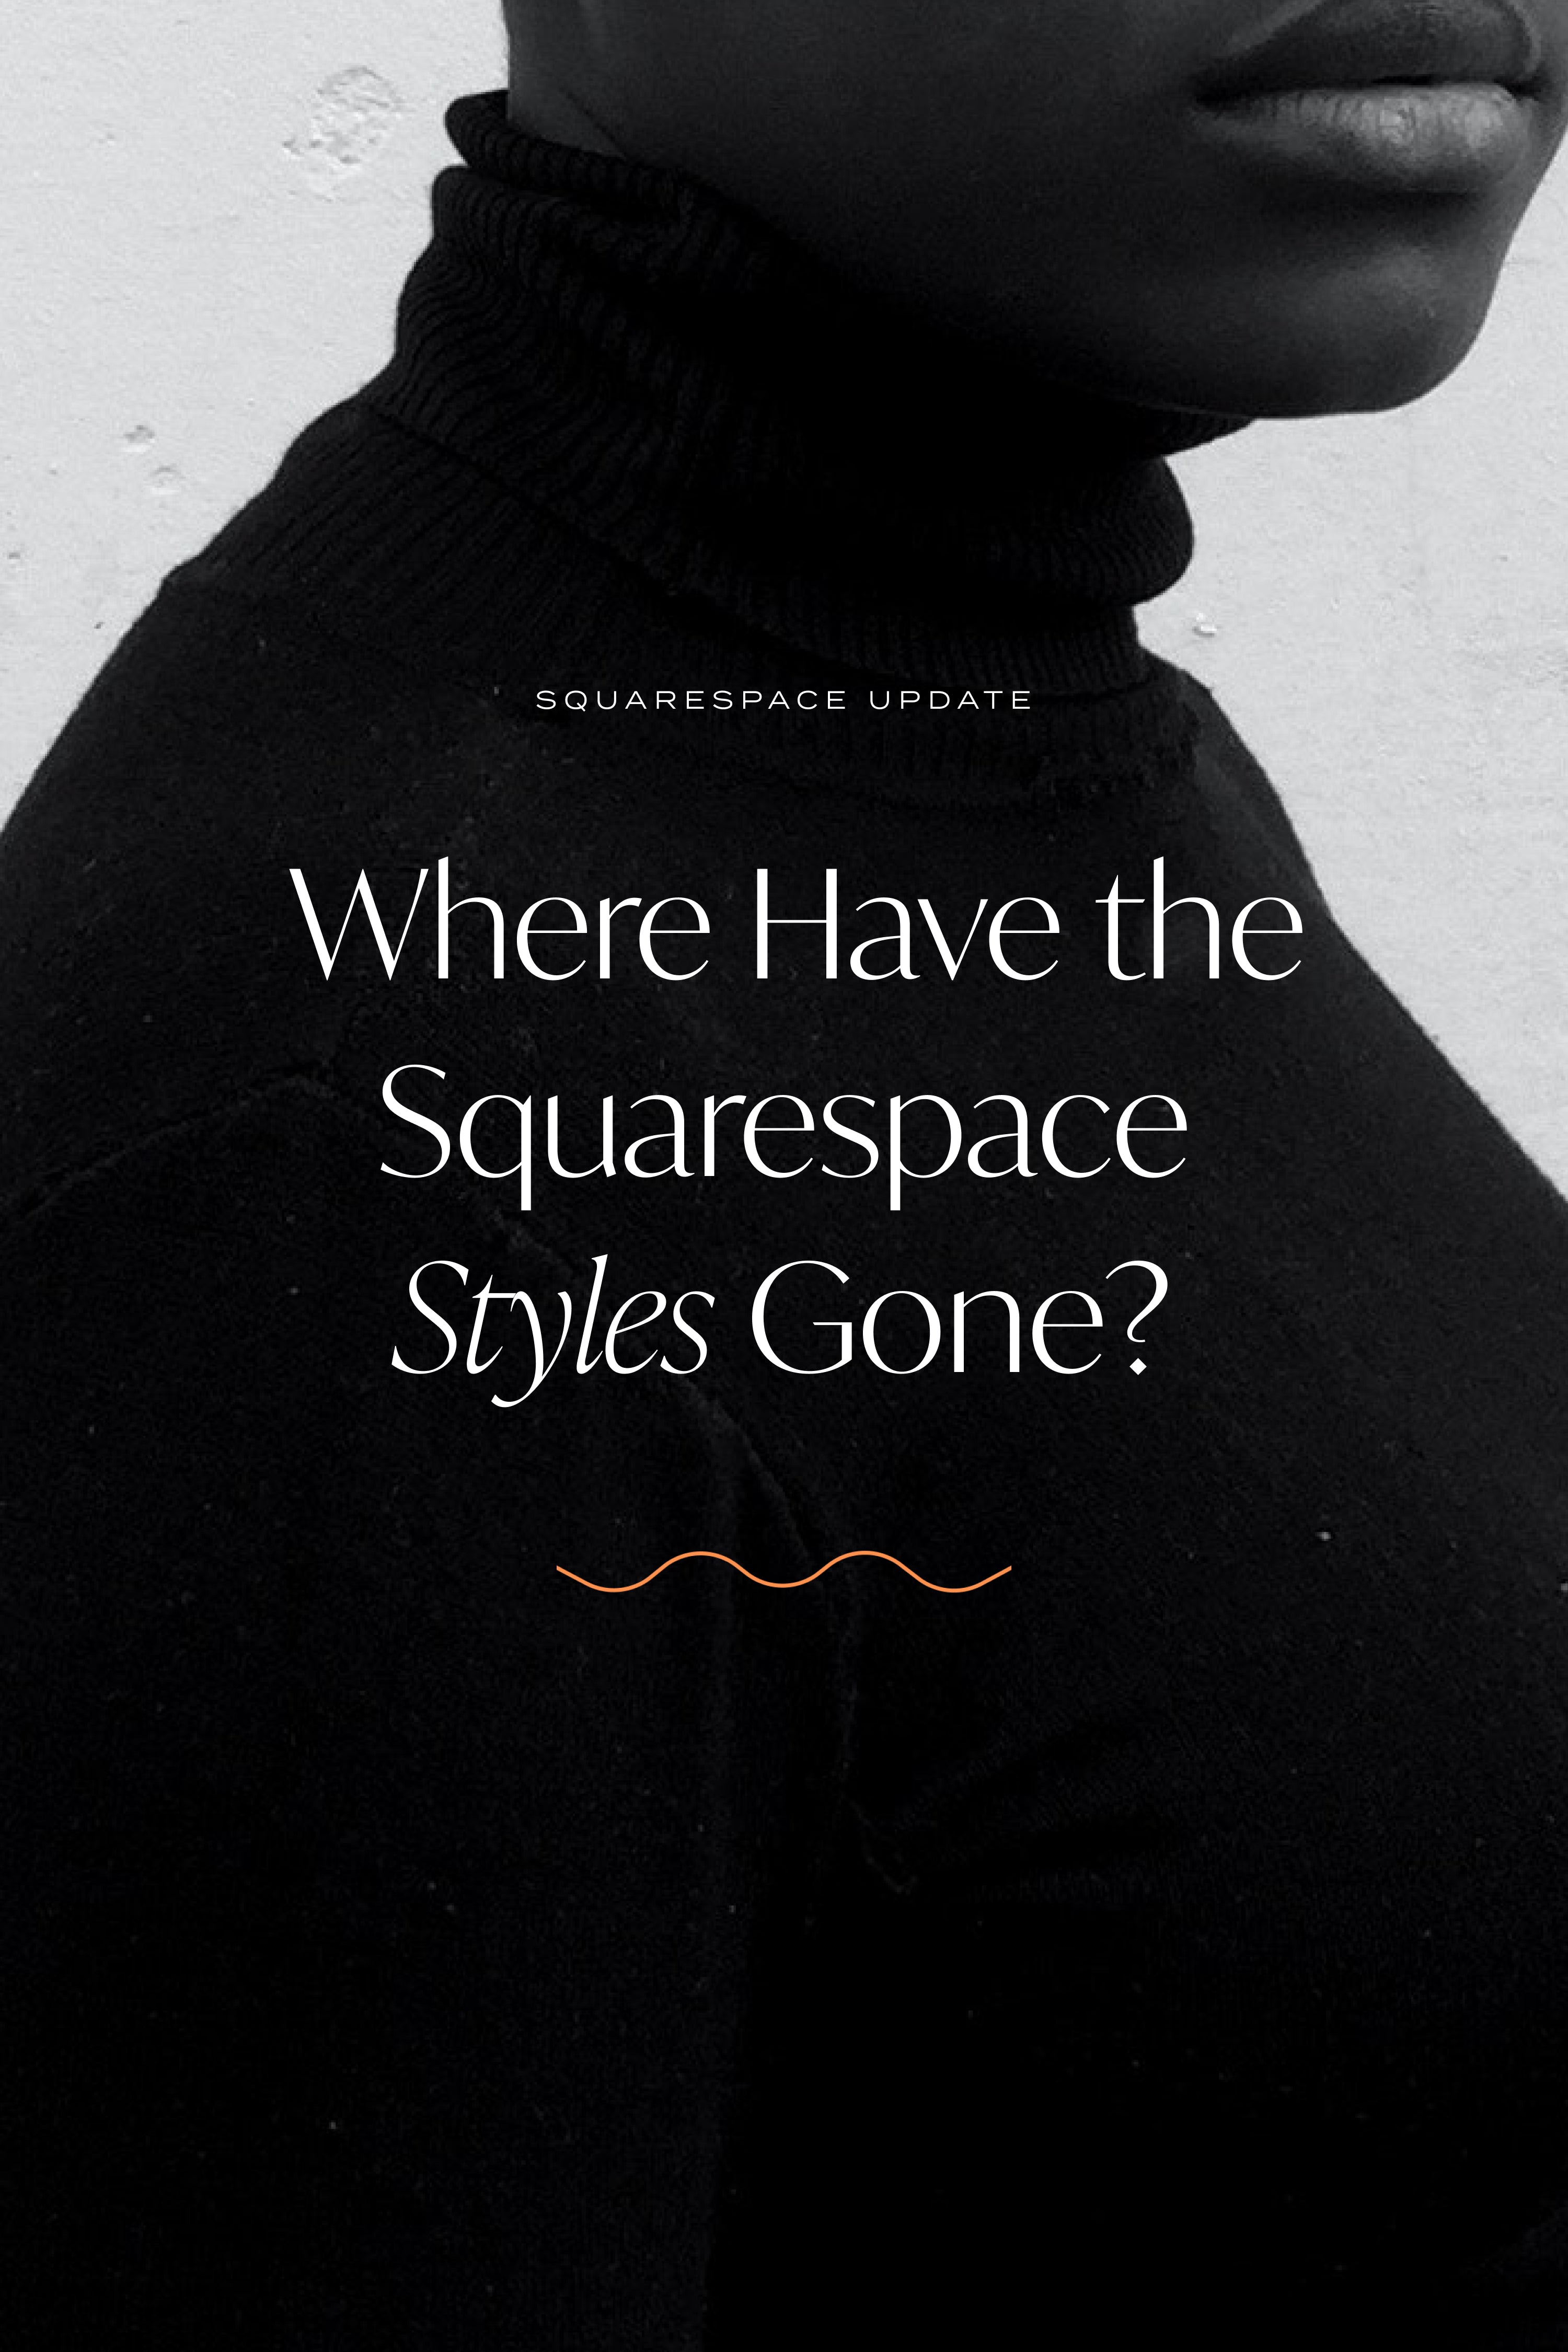 Squarespace Update: Where Have the Squarespace Styles Gone?